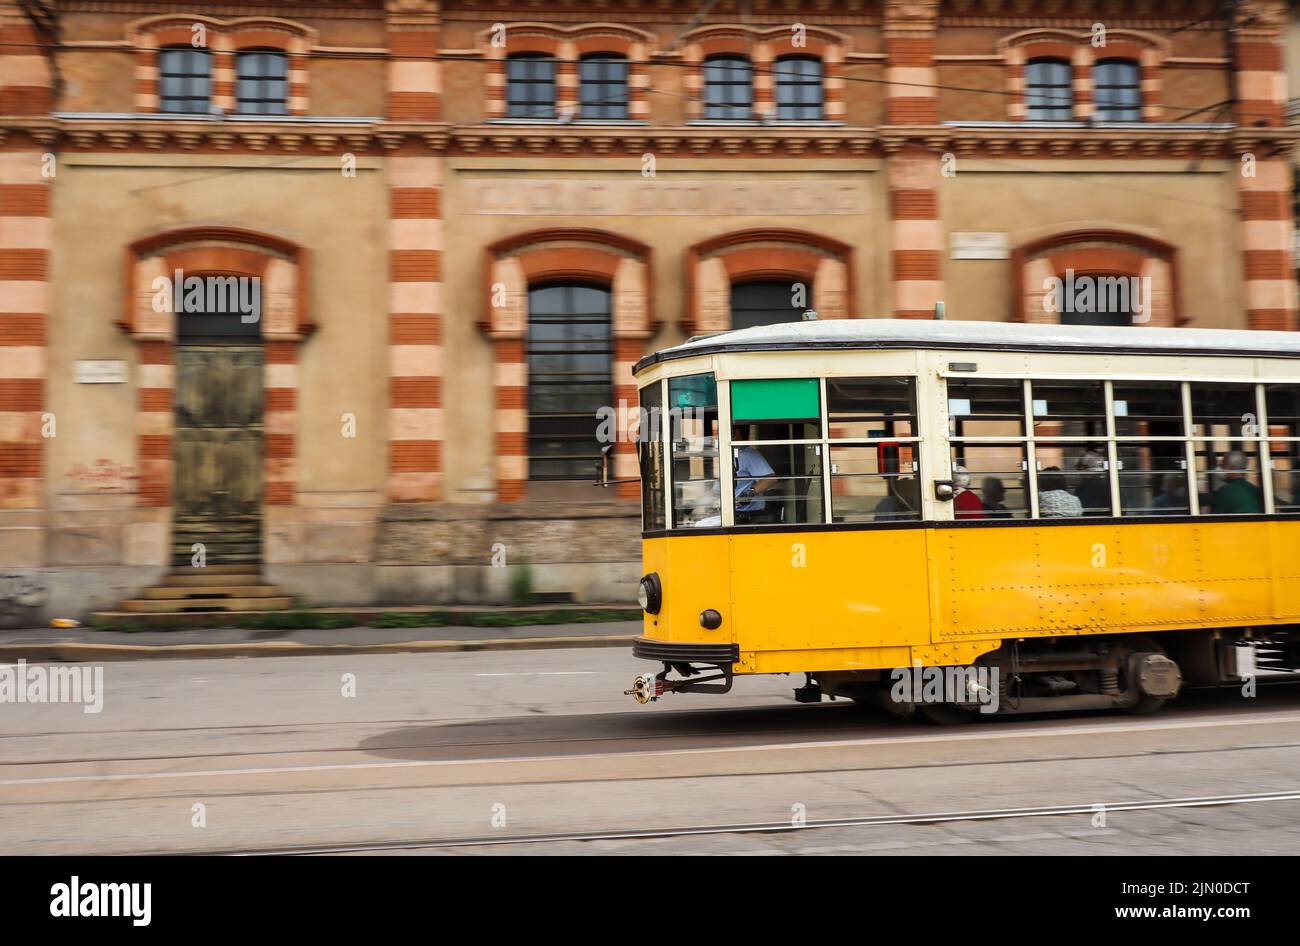 Panning Shot of Yellow Tram in Milan. Colorful Electric Streetcar in Italy. Stock Photo